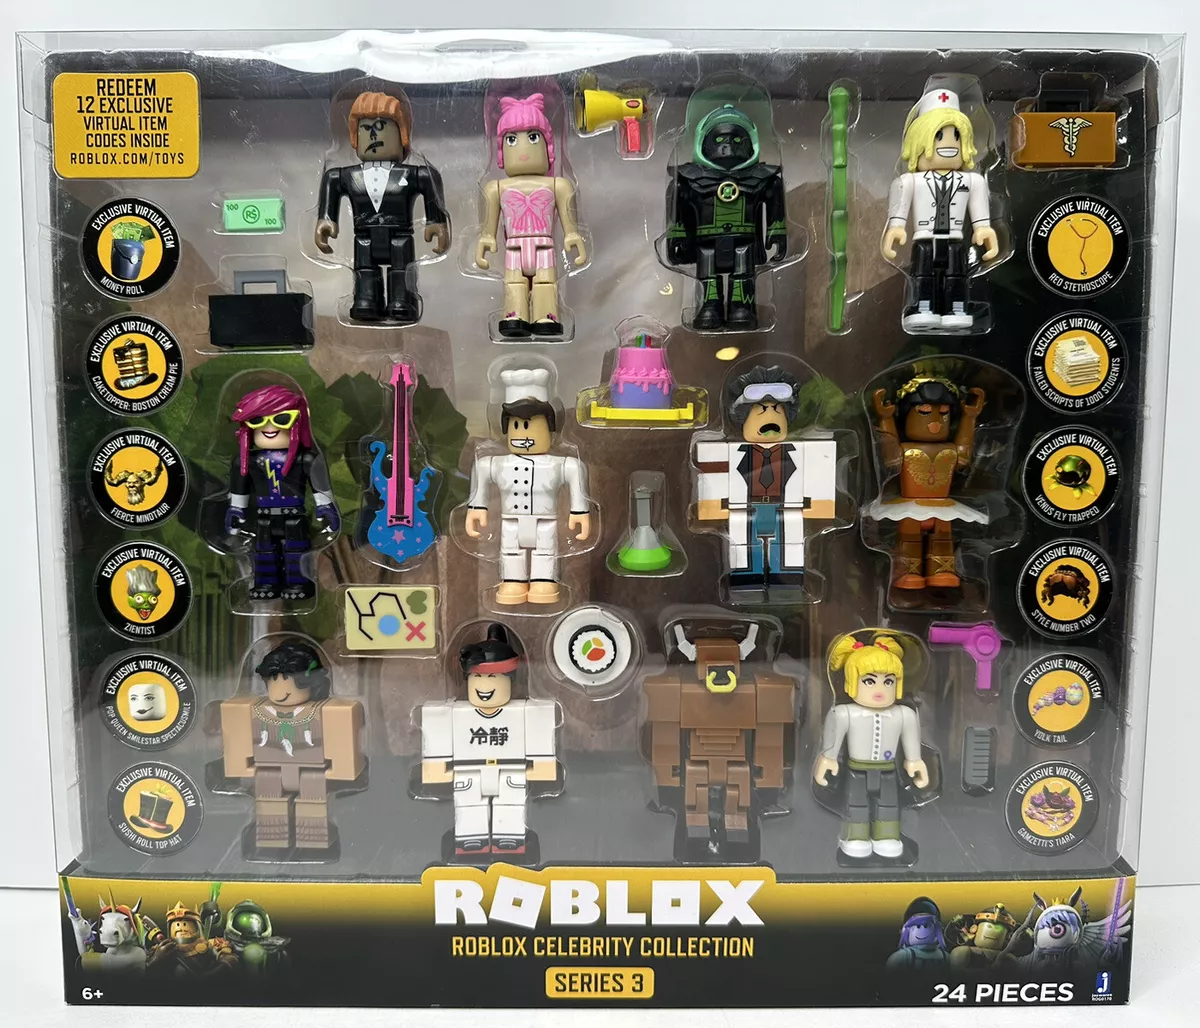 PROJECT ONE PIECE 1 *NEW* UPDATE CODE IN (PROJECT ONE PIECE) ROBLOX 2020! 